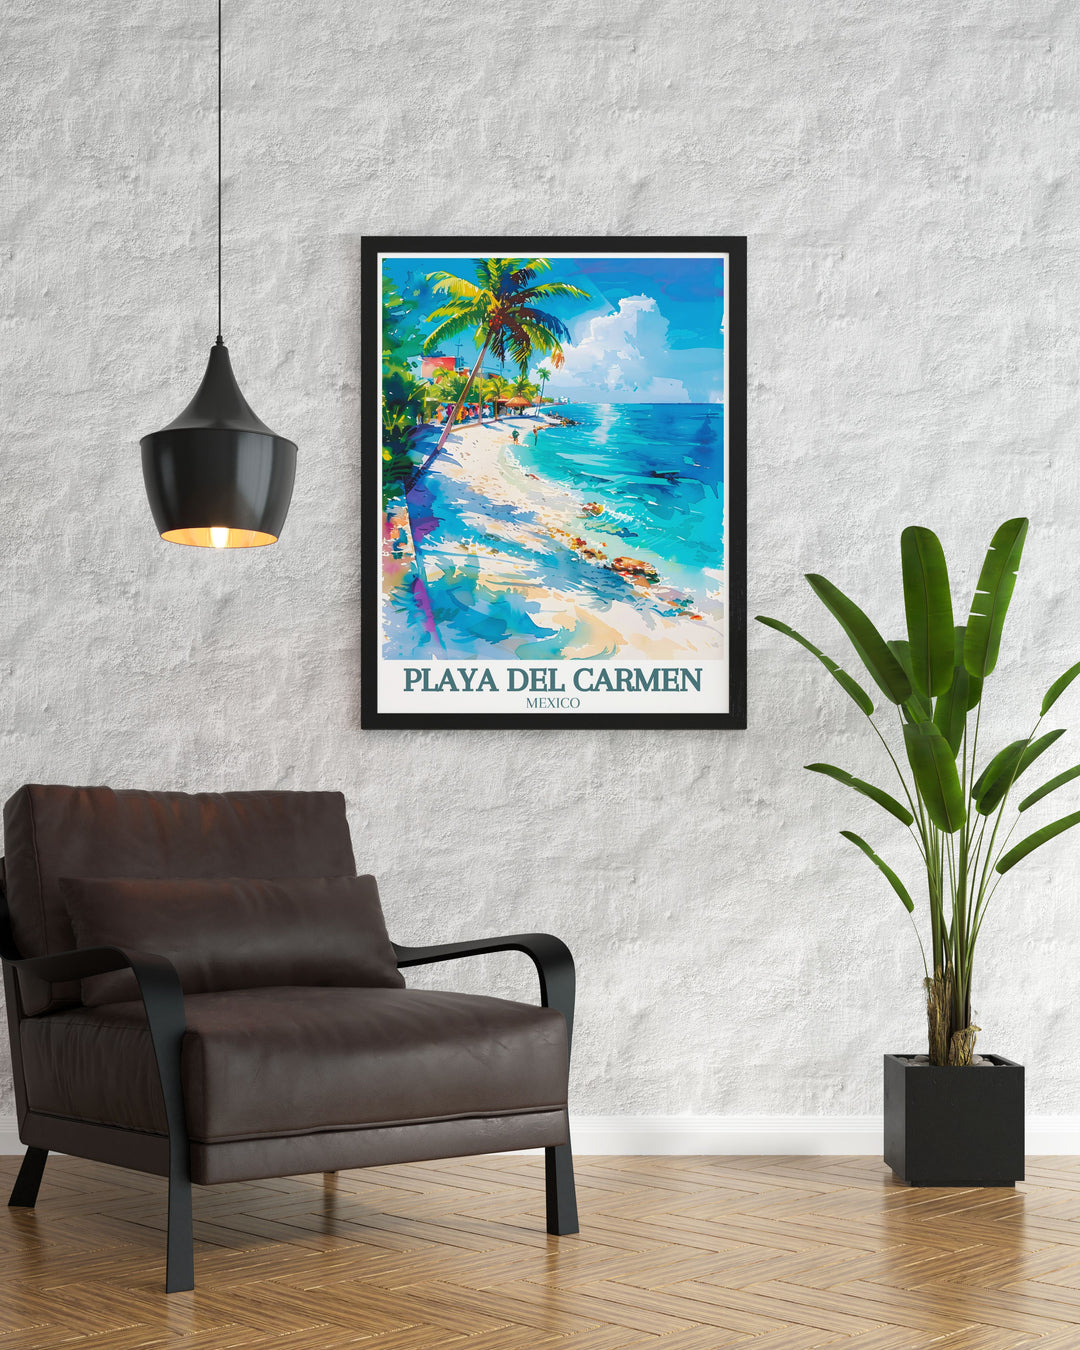 Vibrant Playa Carmen artwork showcasing the stunning Caribbean Sea. This Mexico decor piece adds a touch of paradise to any room and is an excellent choice for those seeking unique travel gifts and wall art.